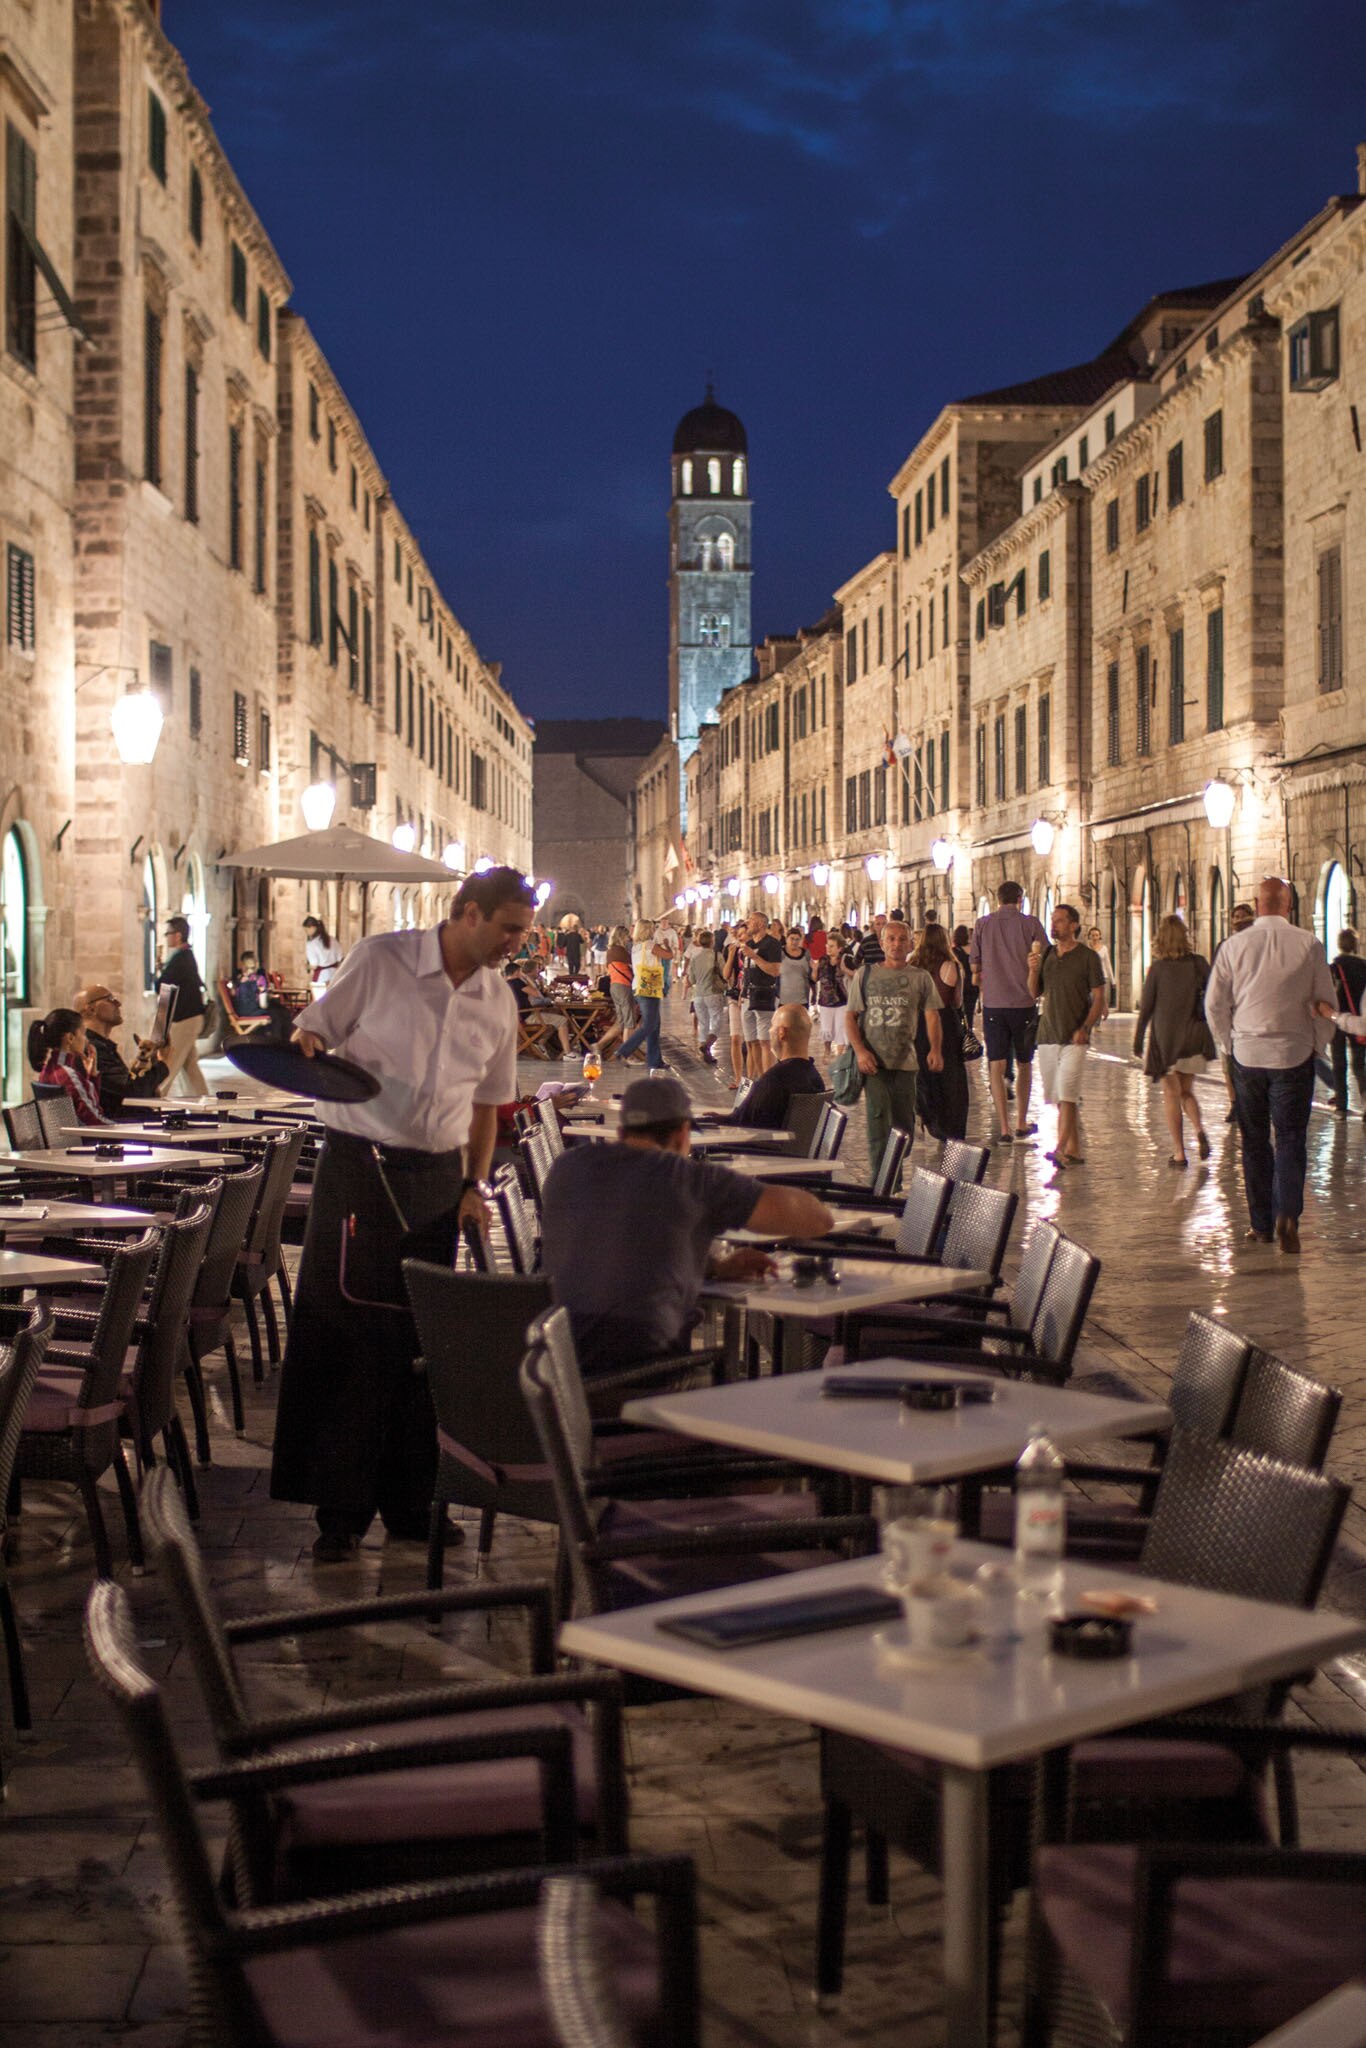 Evenings in the Old Town